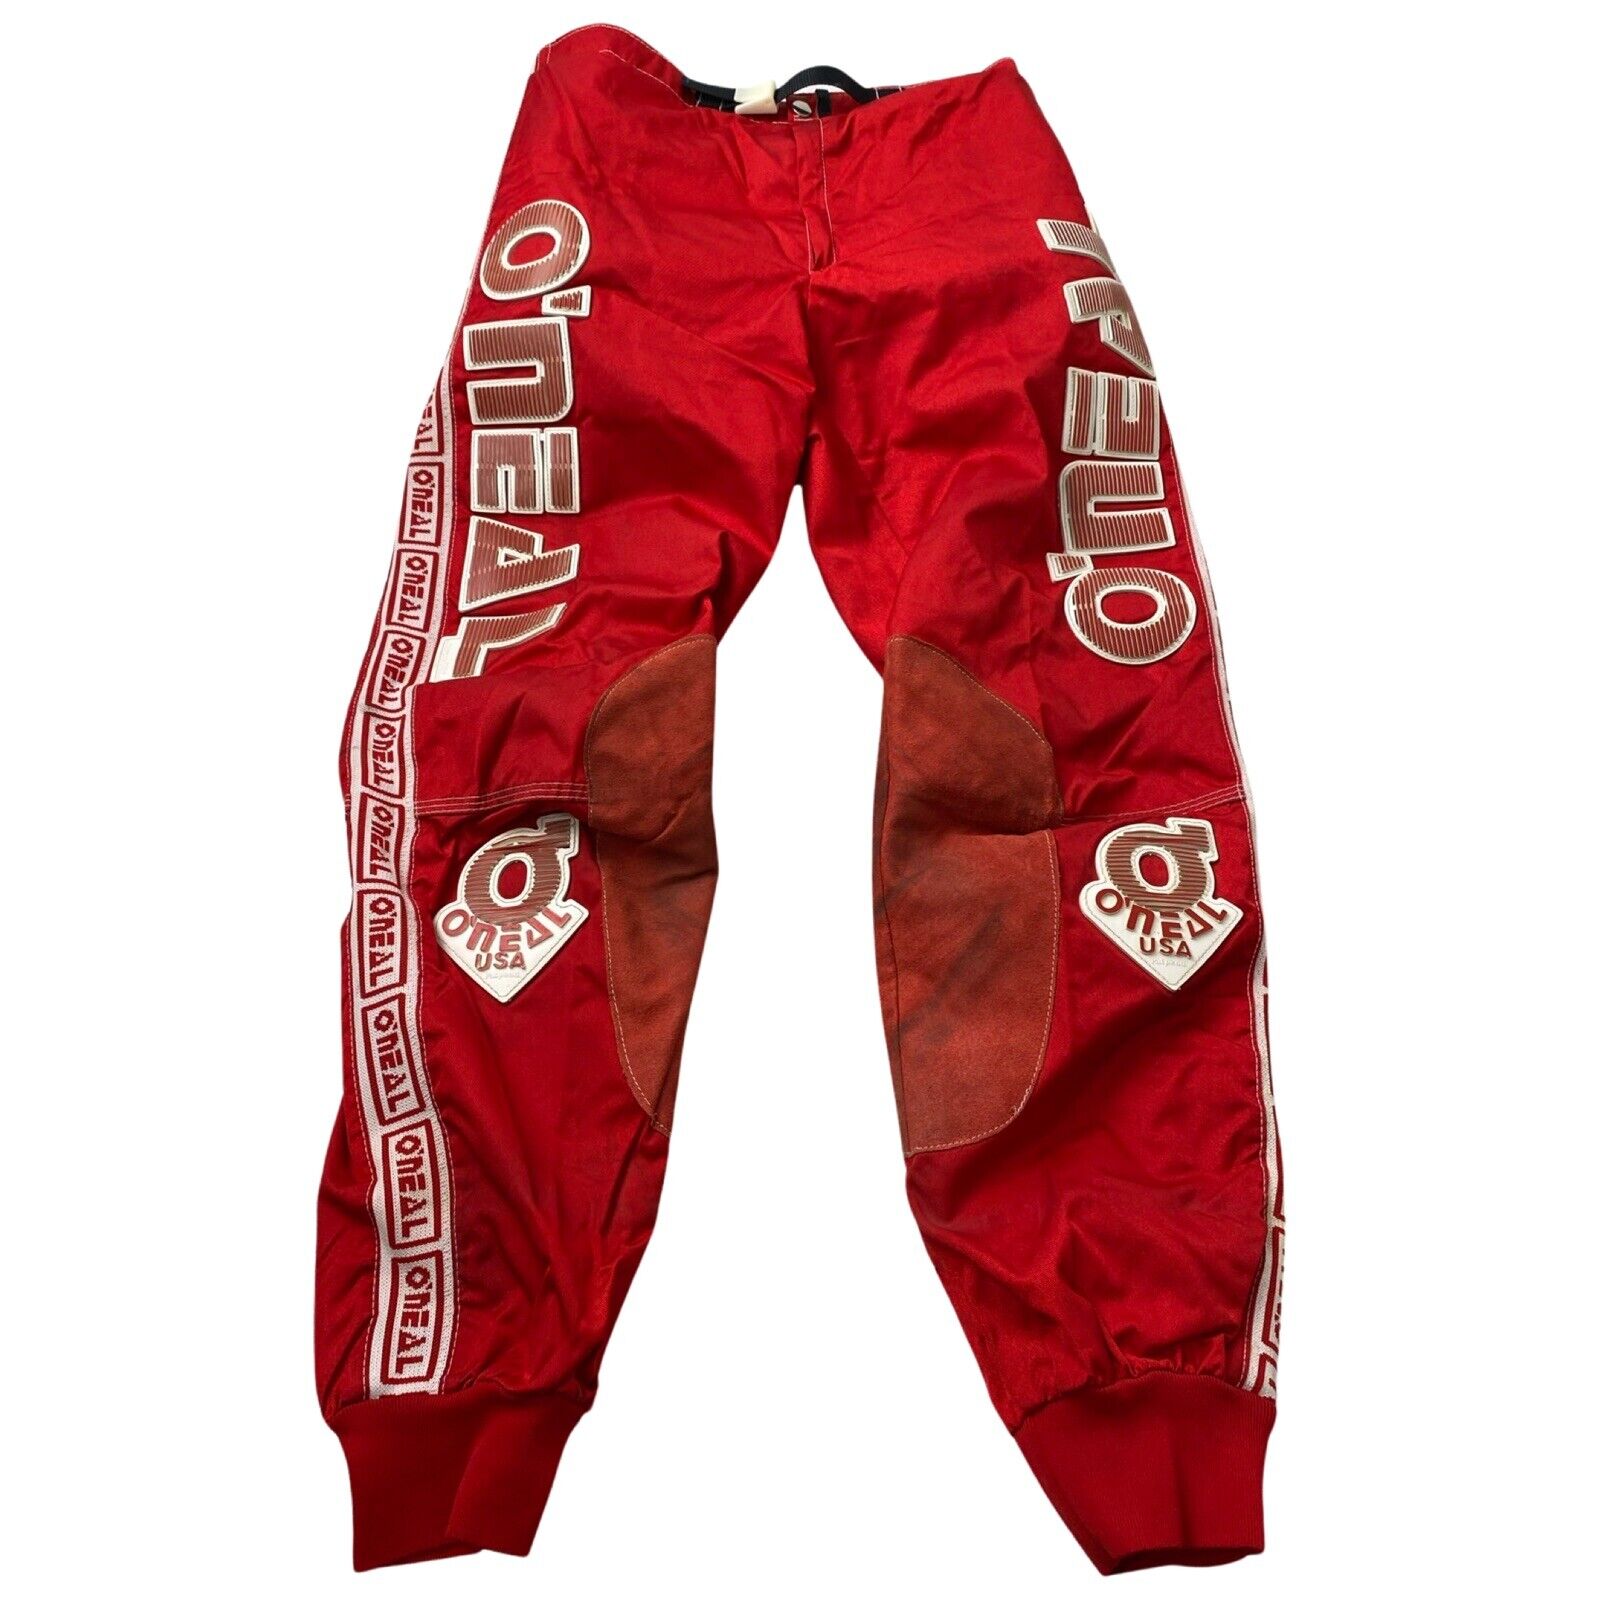 Vintage O’Neal Motocross Pants Size 34 Made In Finland Red White